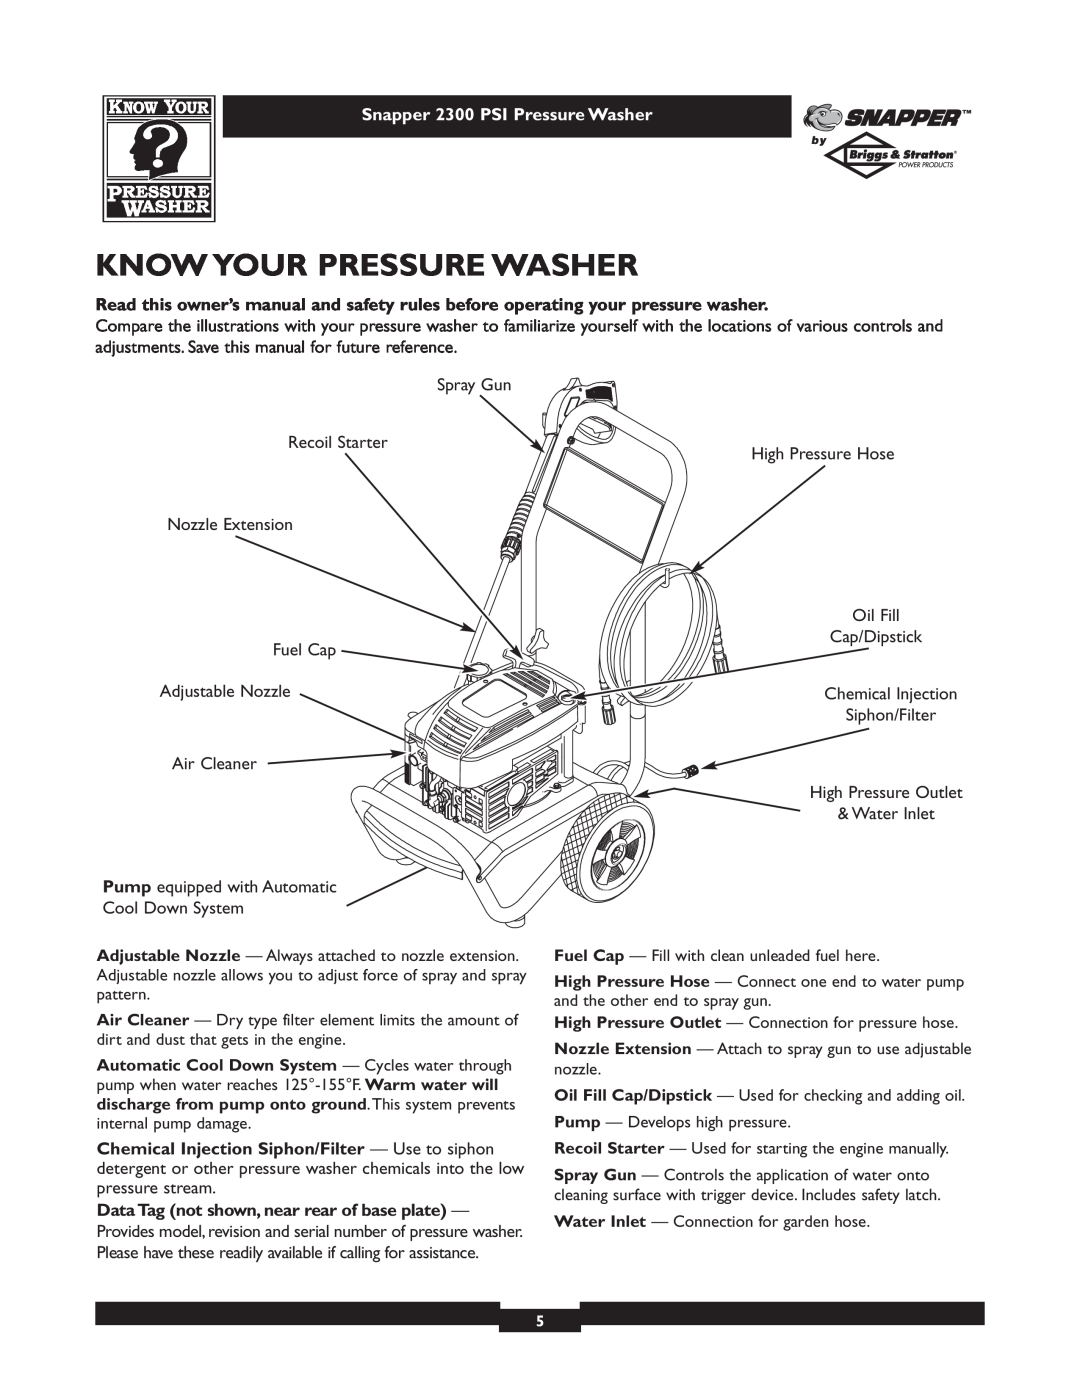 Snapper 1807-1 Know Your Pressure Washer, DataTag not shown, near rear of base plate, Snapper 2300 PSI Pressure Washer 